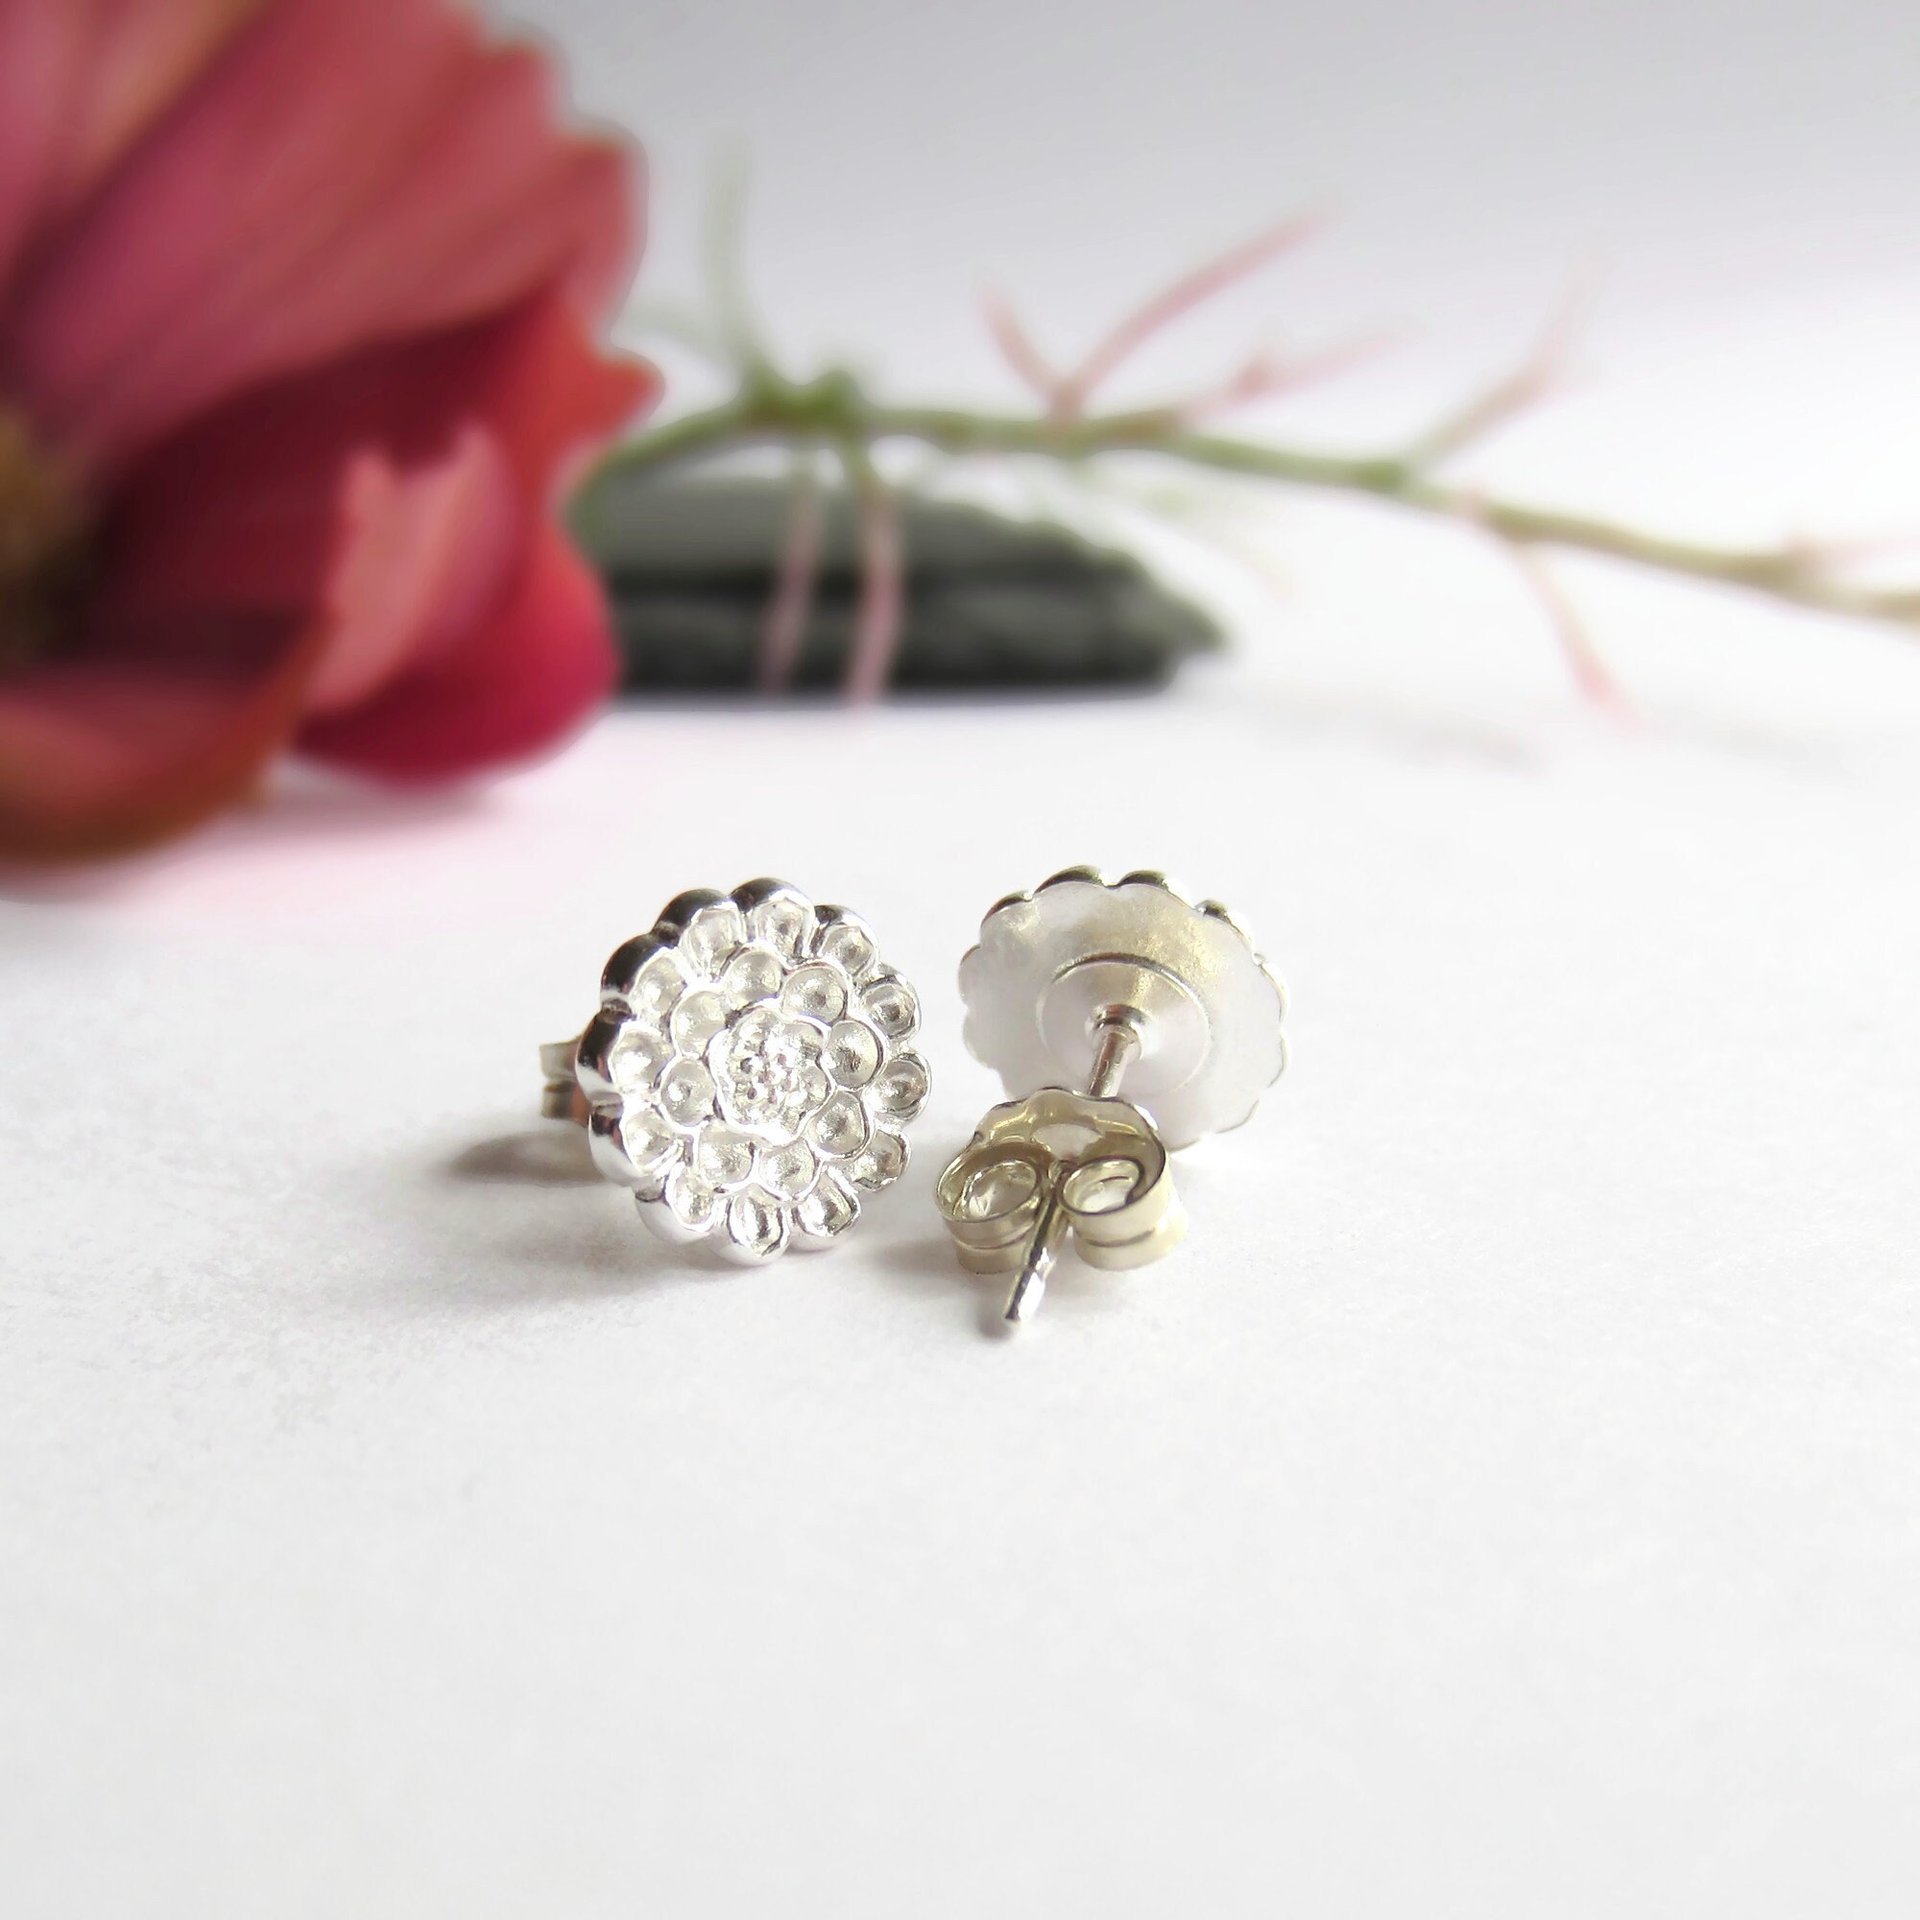 Fine Silver and Sterling Silver Dahlia Flower Stud Earrings ~ Handmade by The Tiny Tree Frog Jewellery